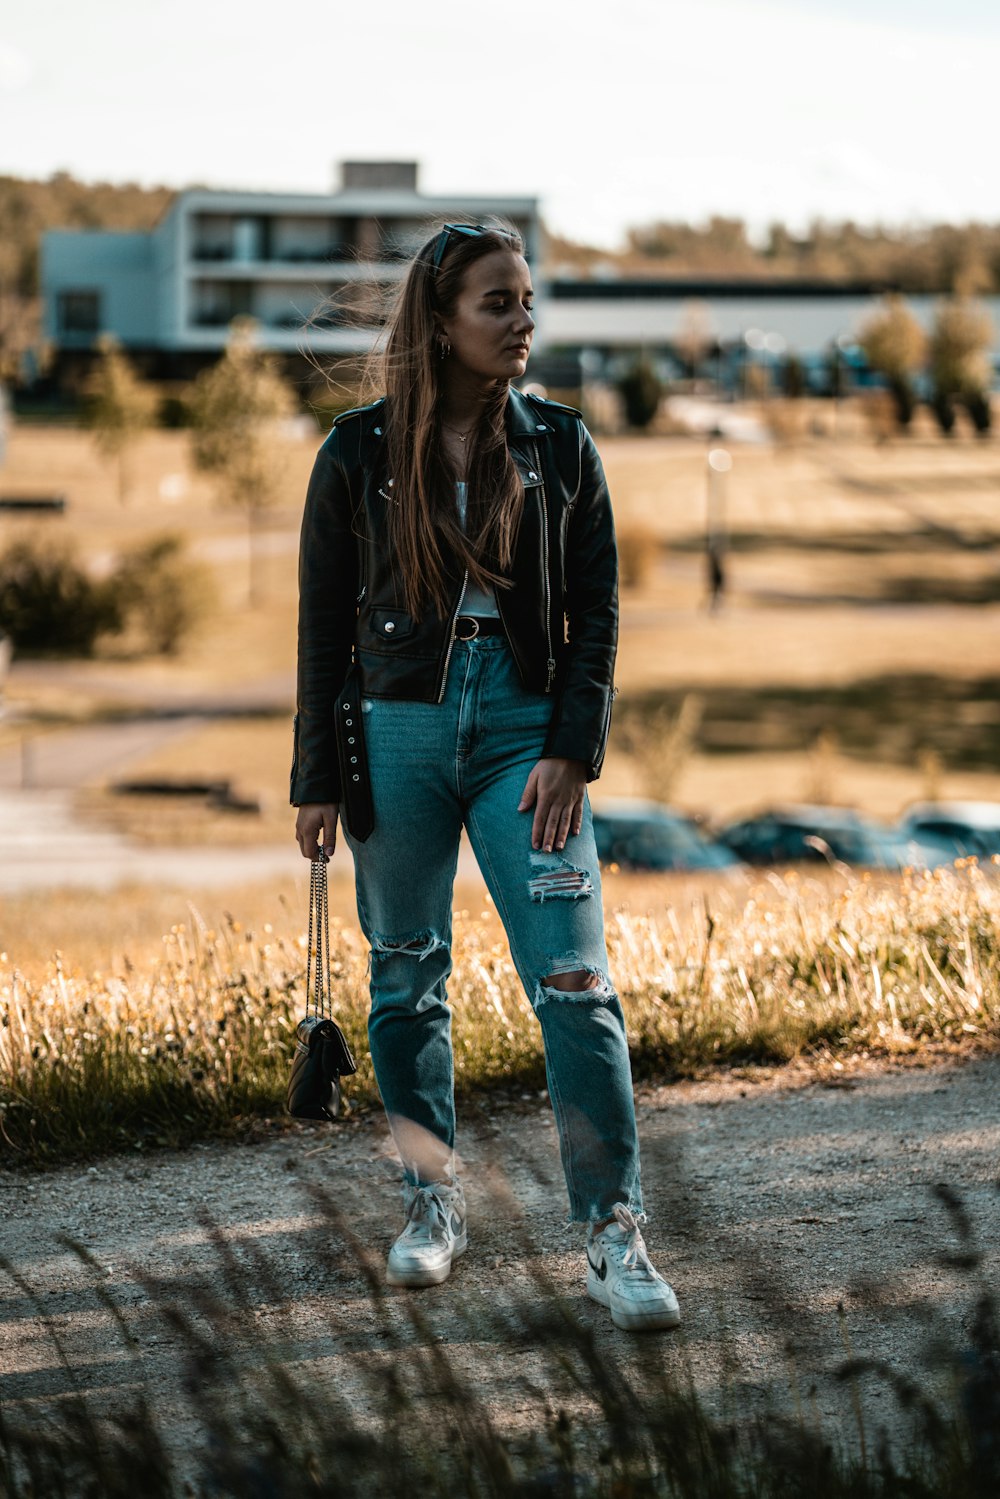 Woman in black leather jacket and blue denim jeans walking on dirt road during daytime photo Free Deutschland Image on Unsplash